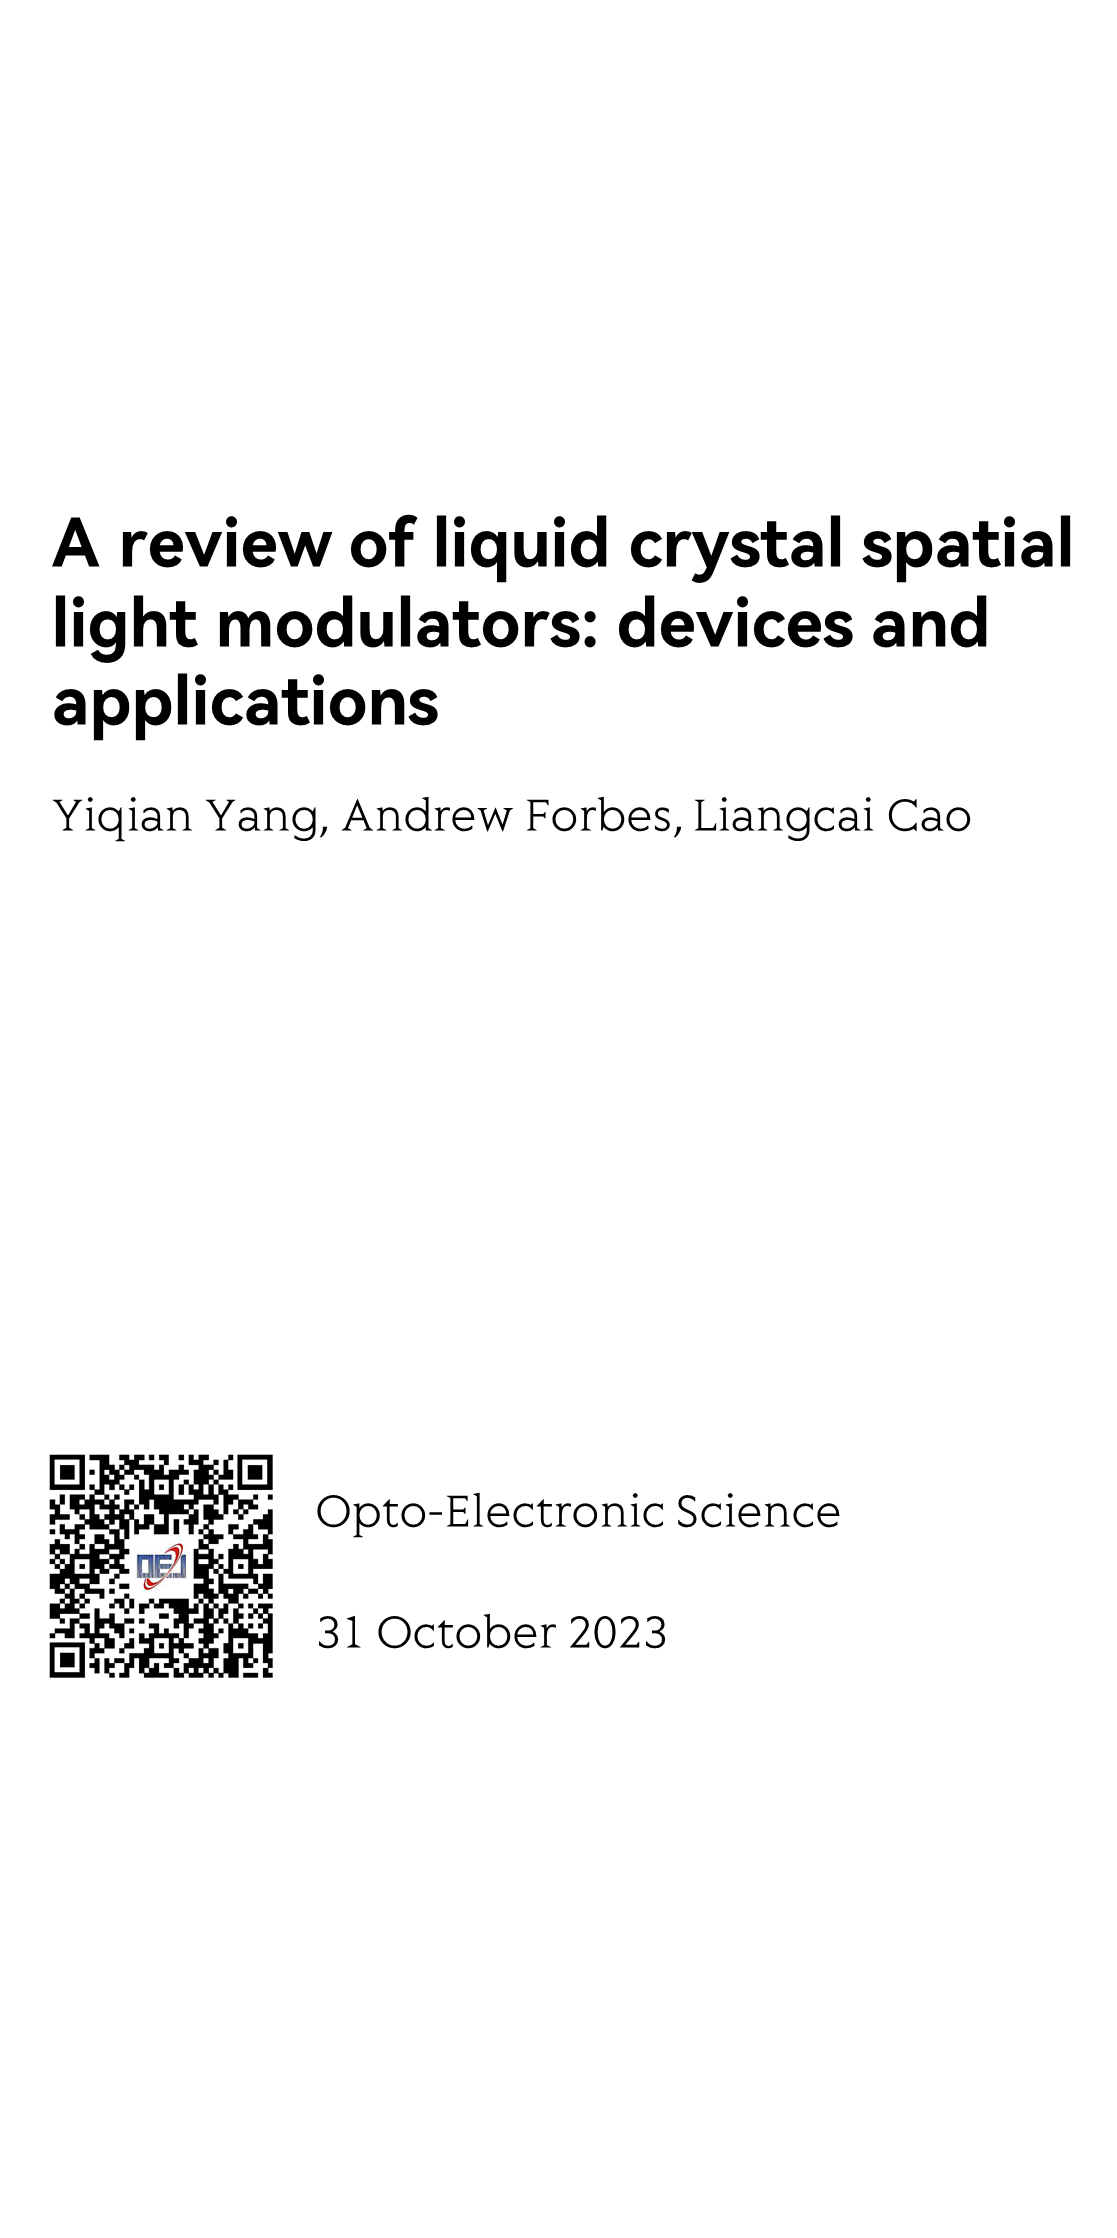 A review of liquid crystal spatial light modulators: devices and applications_1